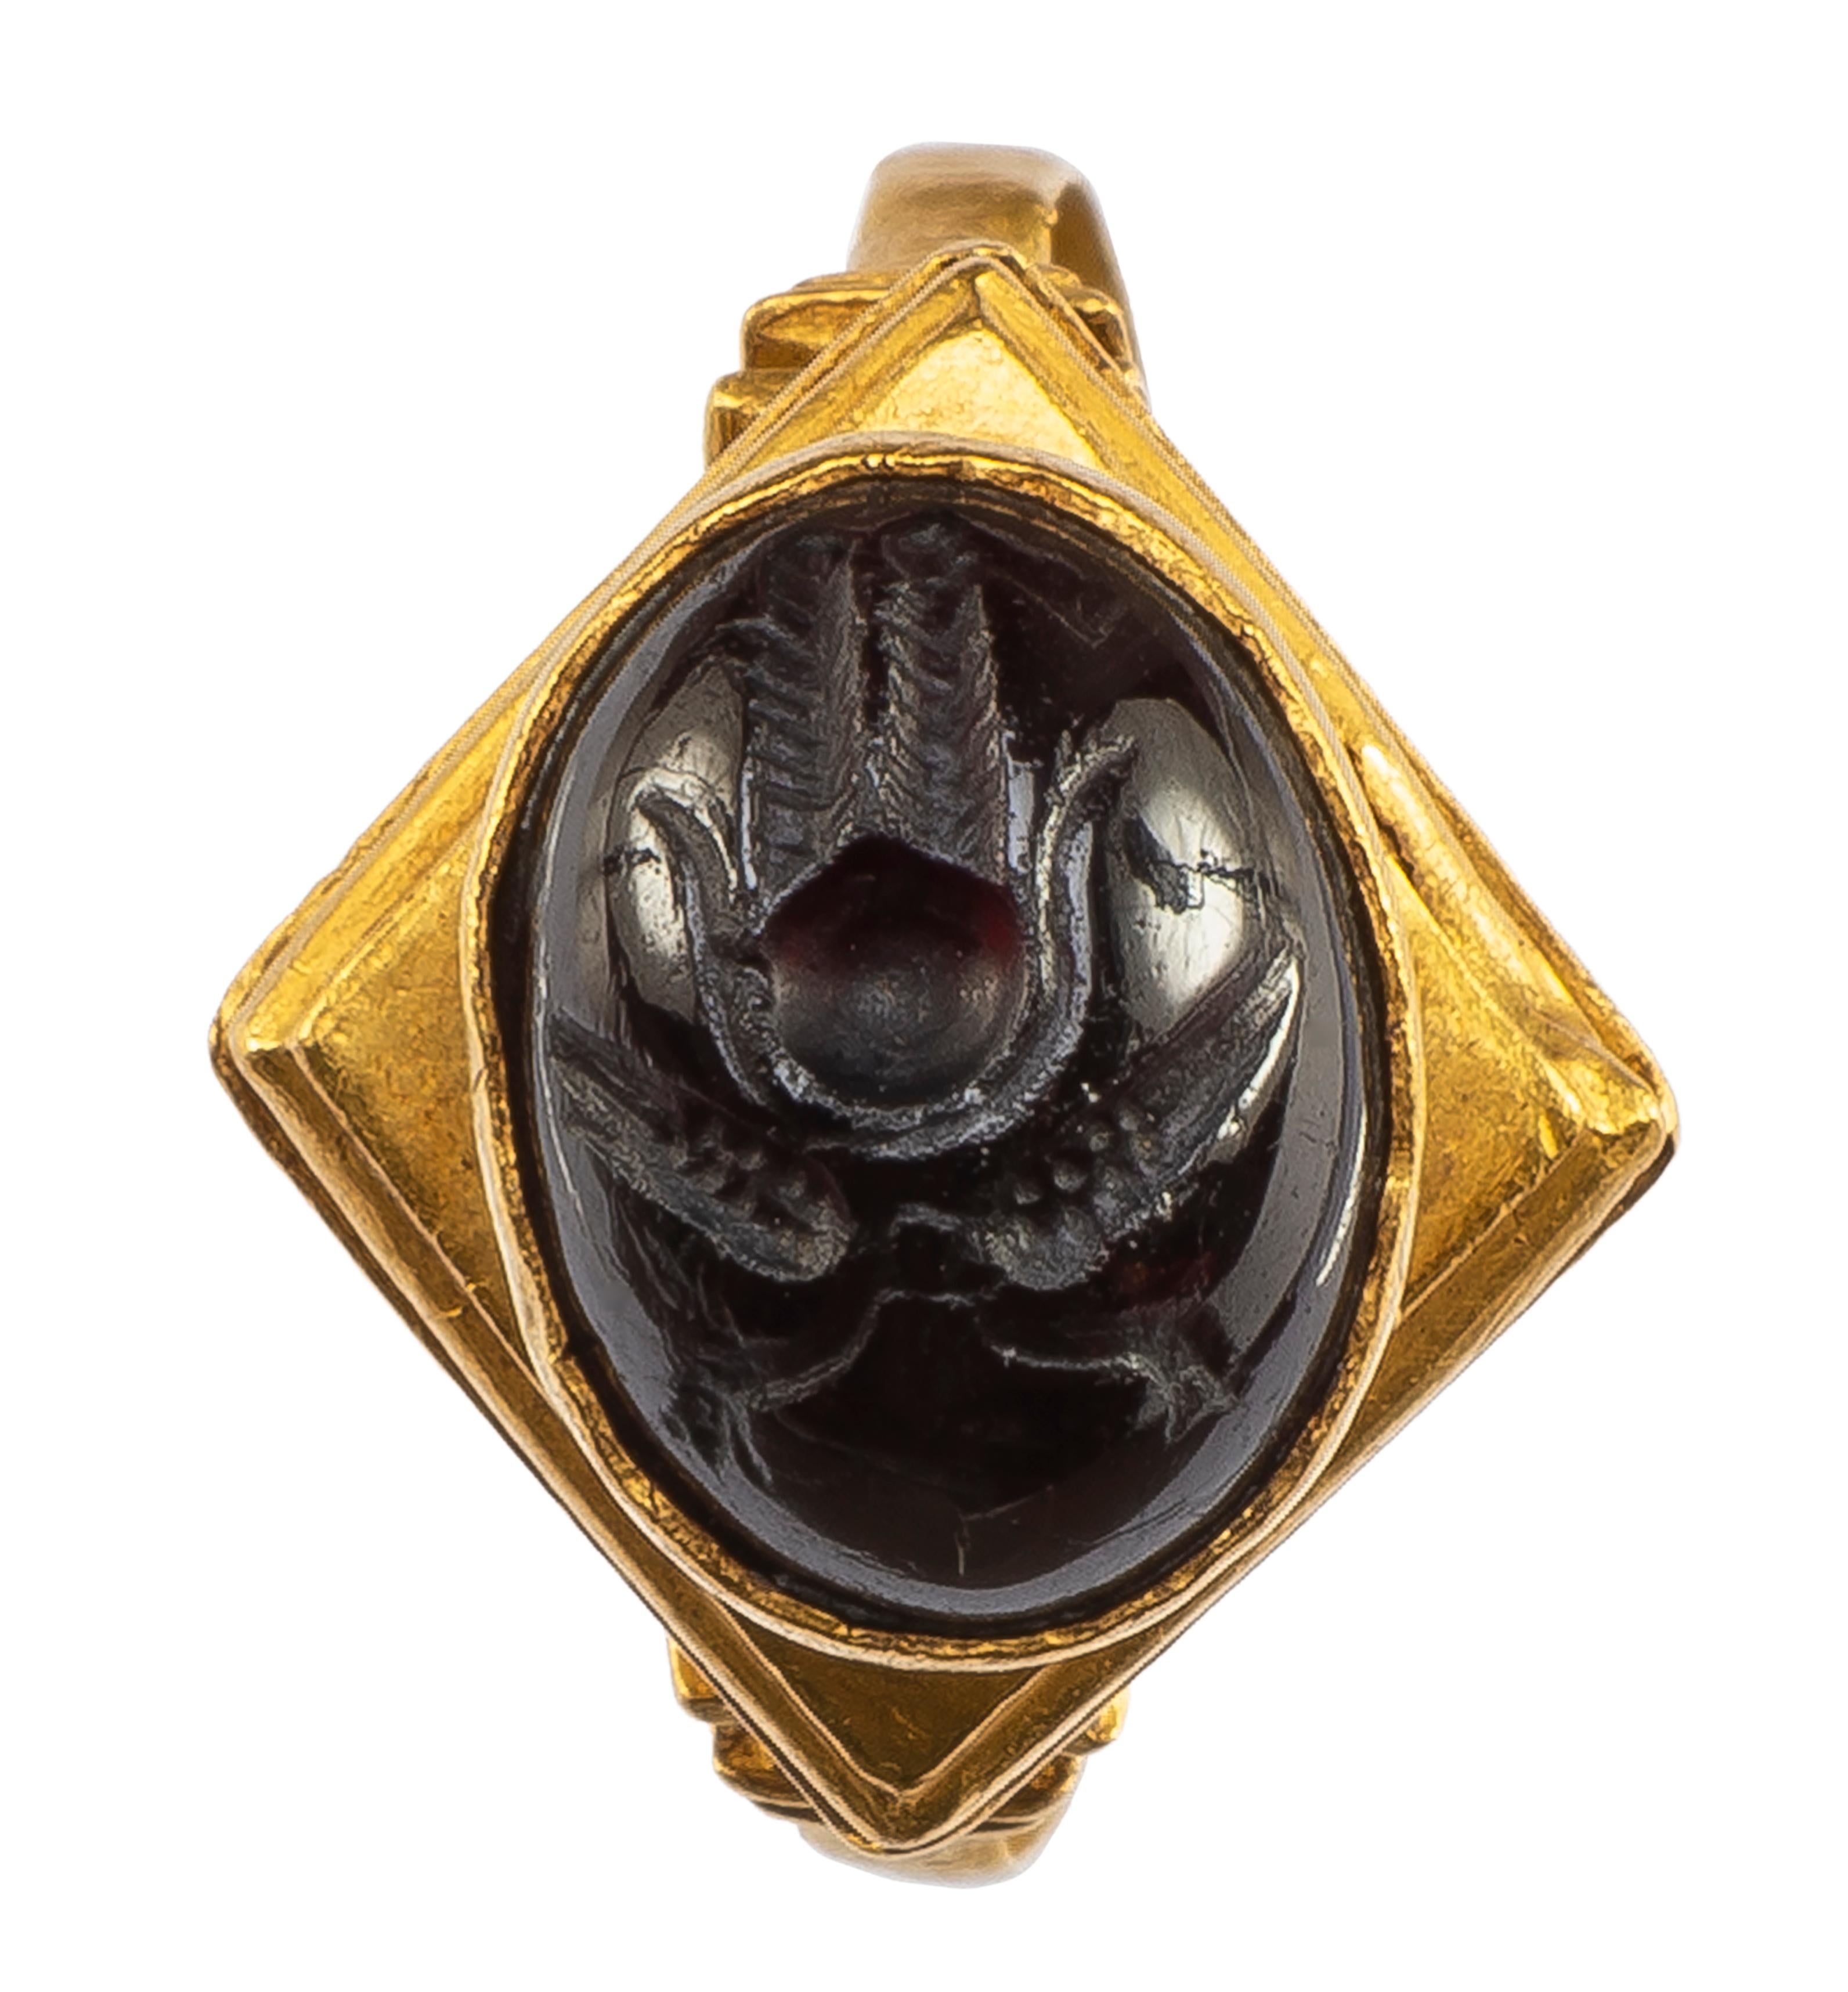 Hellenistic Ring with Garnet Intaglio  
Hellenistic,  2nd-1st century BCE  
Gold, garnet  
Weight 7.5 gr.; Circumference 58.21 mm.; US size 8½; UK size Q 3/4  

Gold ring with flat, almost “u”-shaped hoop made of gold sheet metal. The capital-like